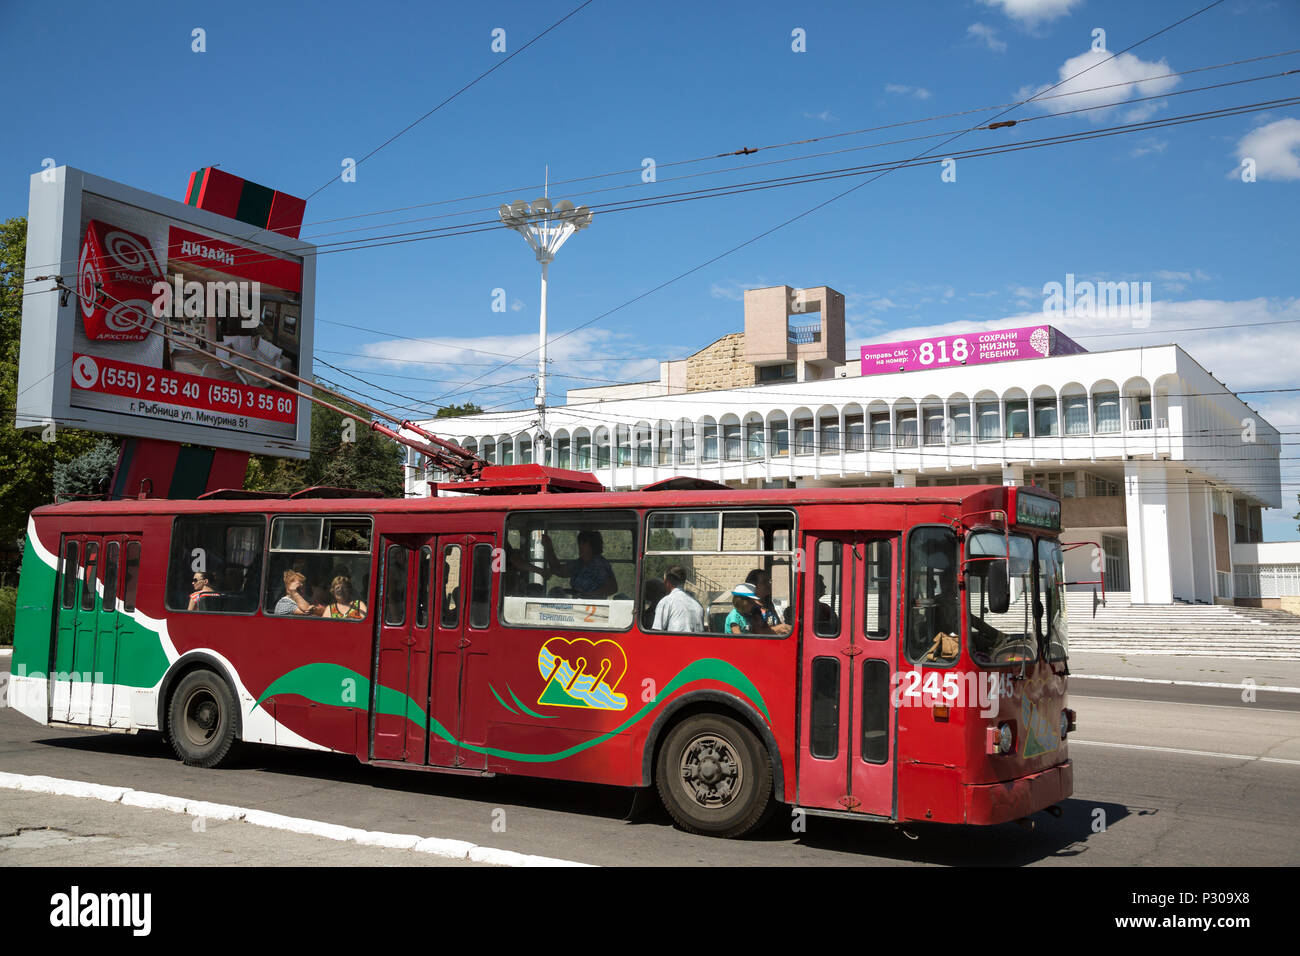 25.08.2016, Tiraspol, Transnistria, Moldova - Illuminated billboard and trolleybus in Transnistrian colors, behind the former Pioneer Palace (now: Pal Stock Photo